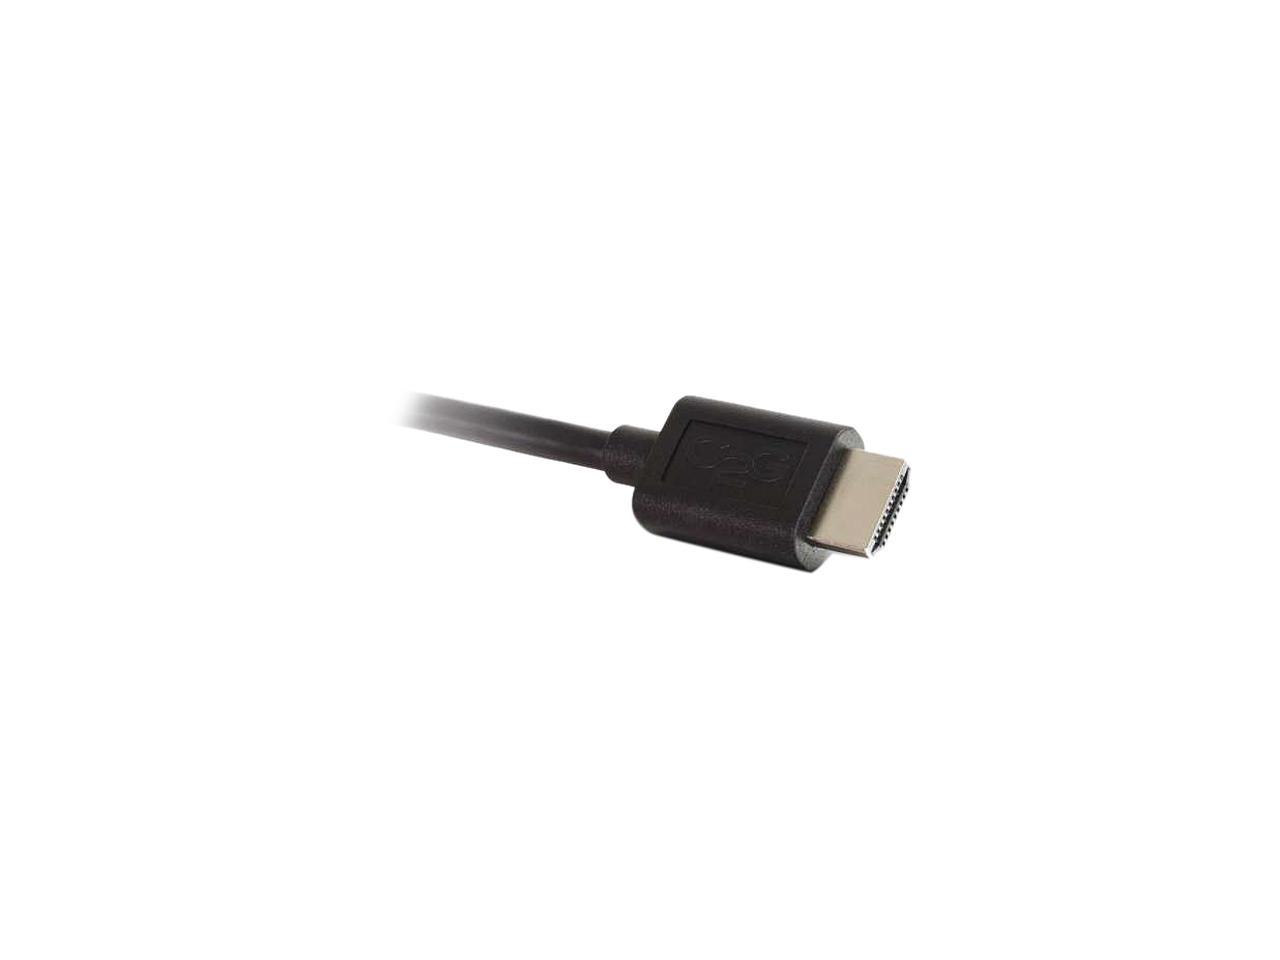 C2g 8In Hdmi To Dvi Adapter Converter Dongle - M/F Black - image 3 of 3